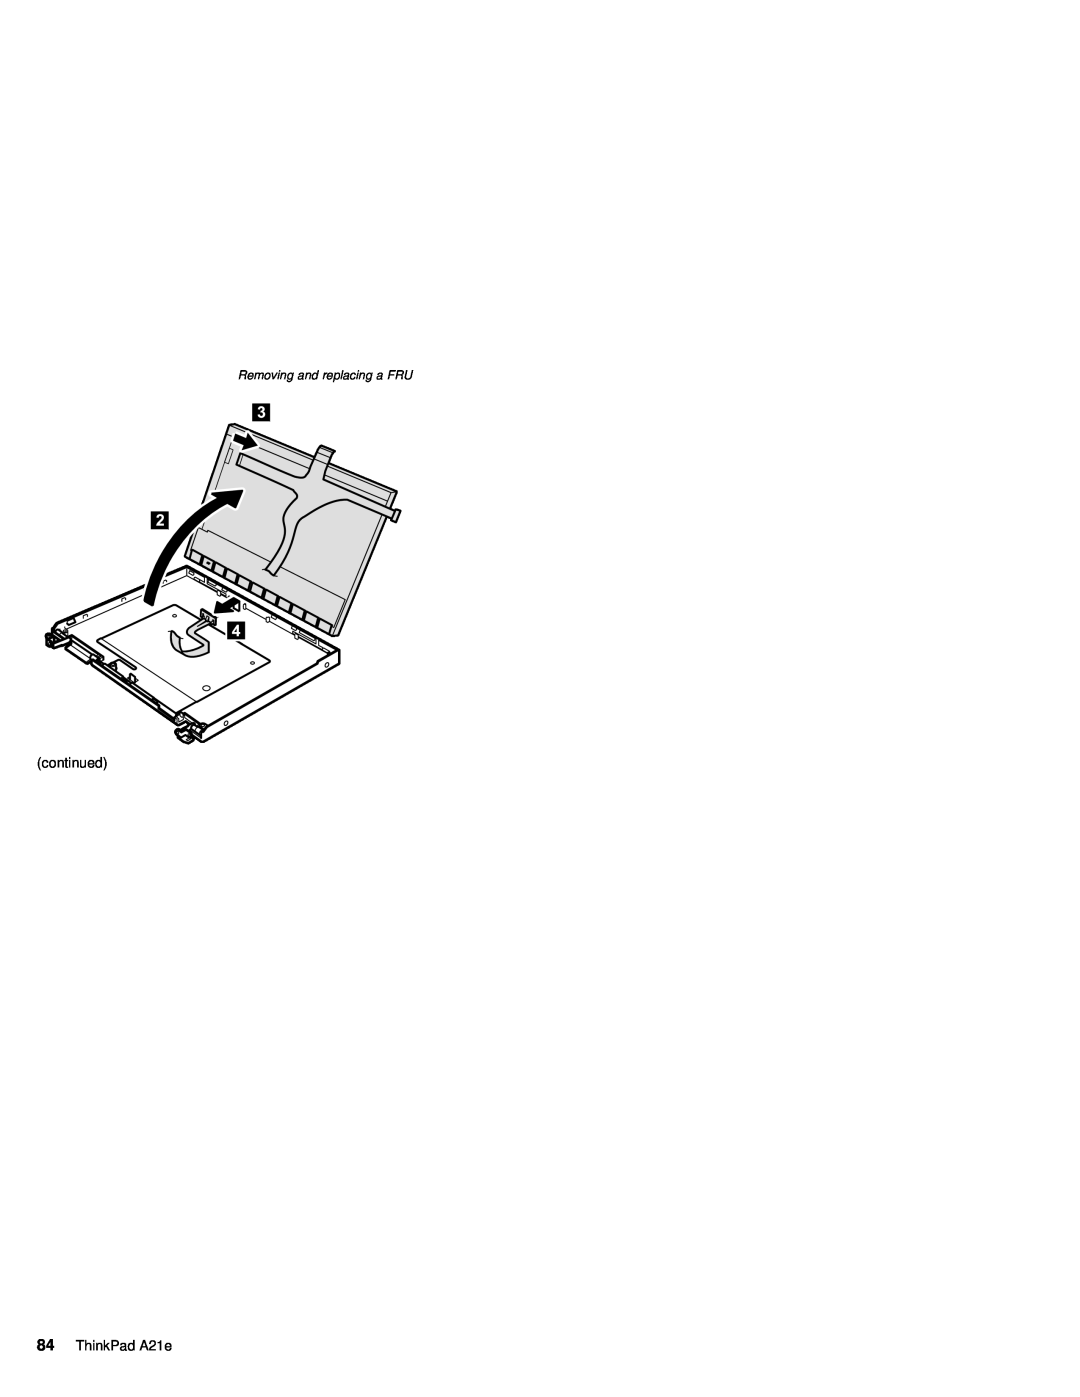 IBM MT 2632 manual continued, ThinkPad A21e, Removing and replacing a FRU 